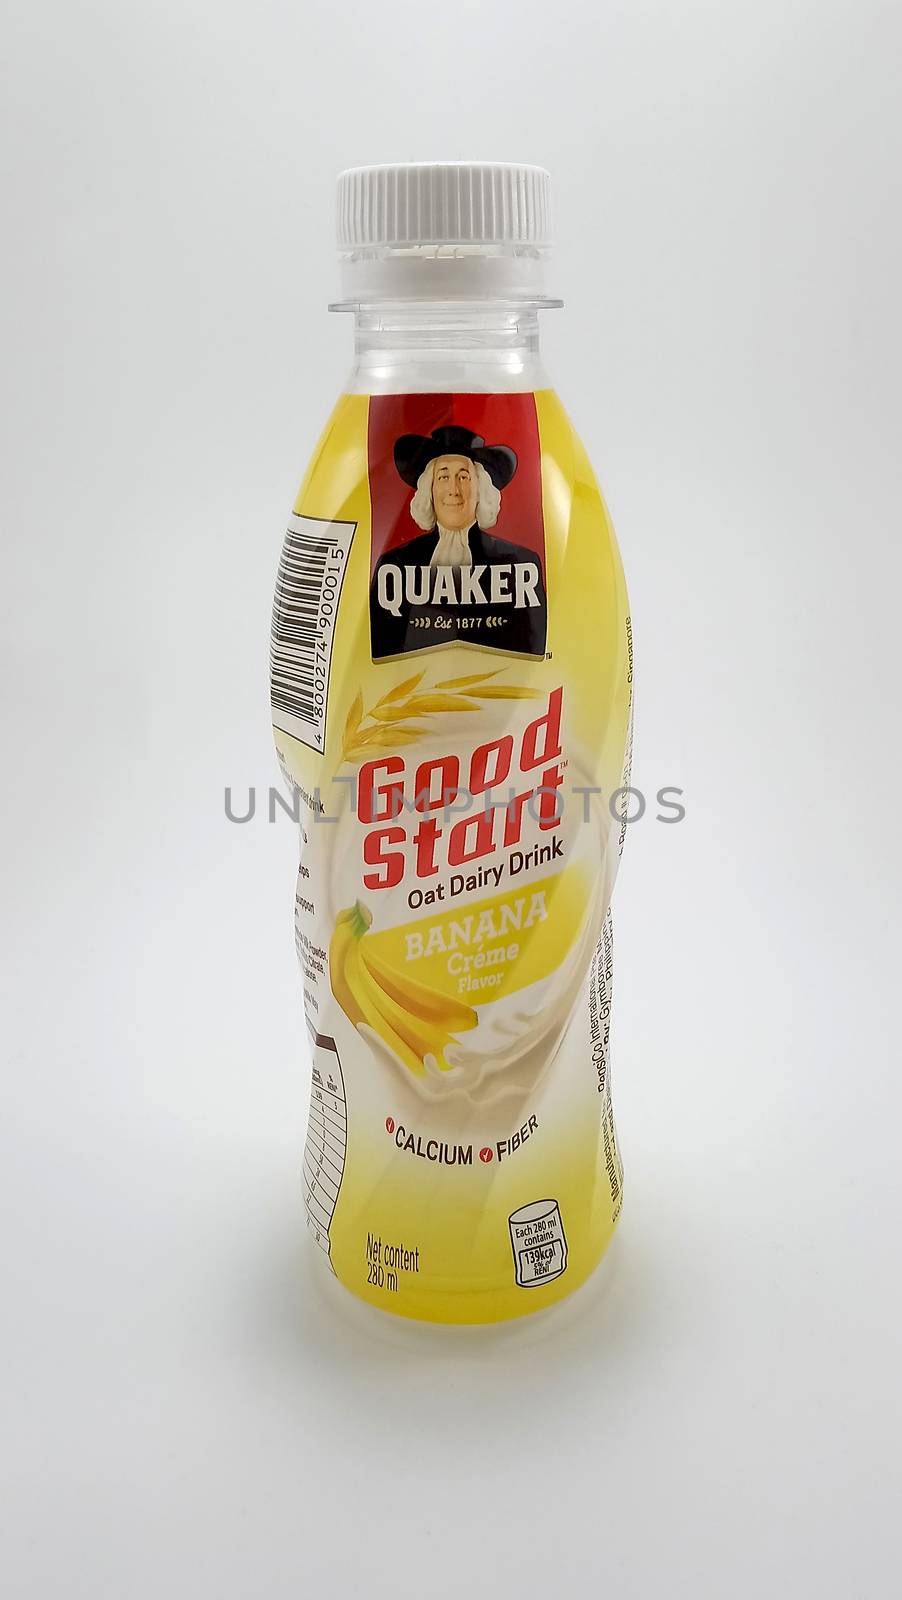 Quaker good start oat dairy banana creme flavor drink in Manila, by imwaltersy